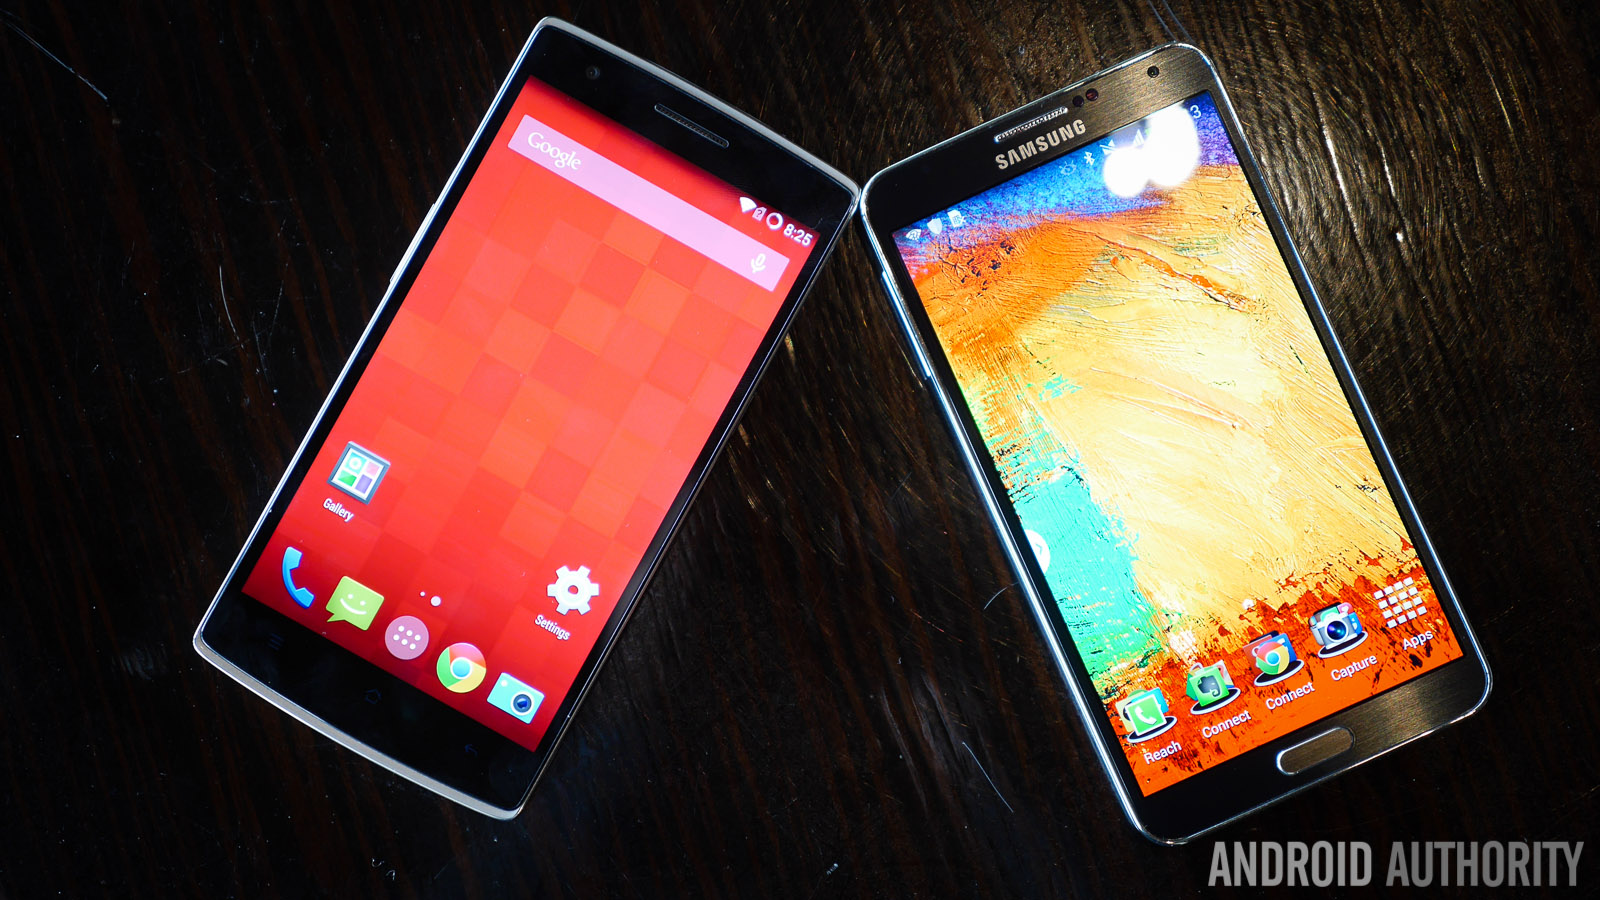 oneplus one vs galaxy note 3 aa (16 of 17)